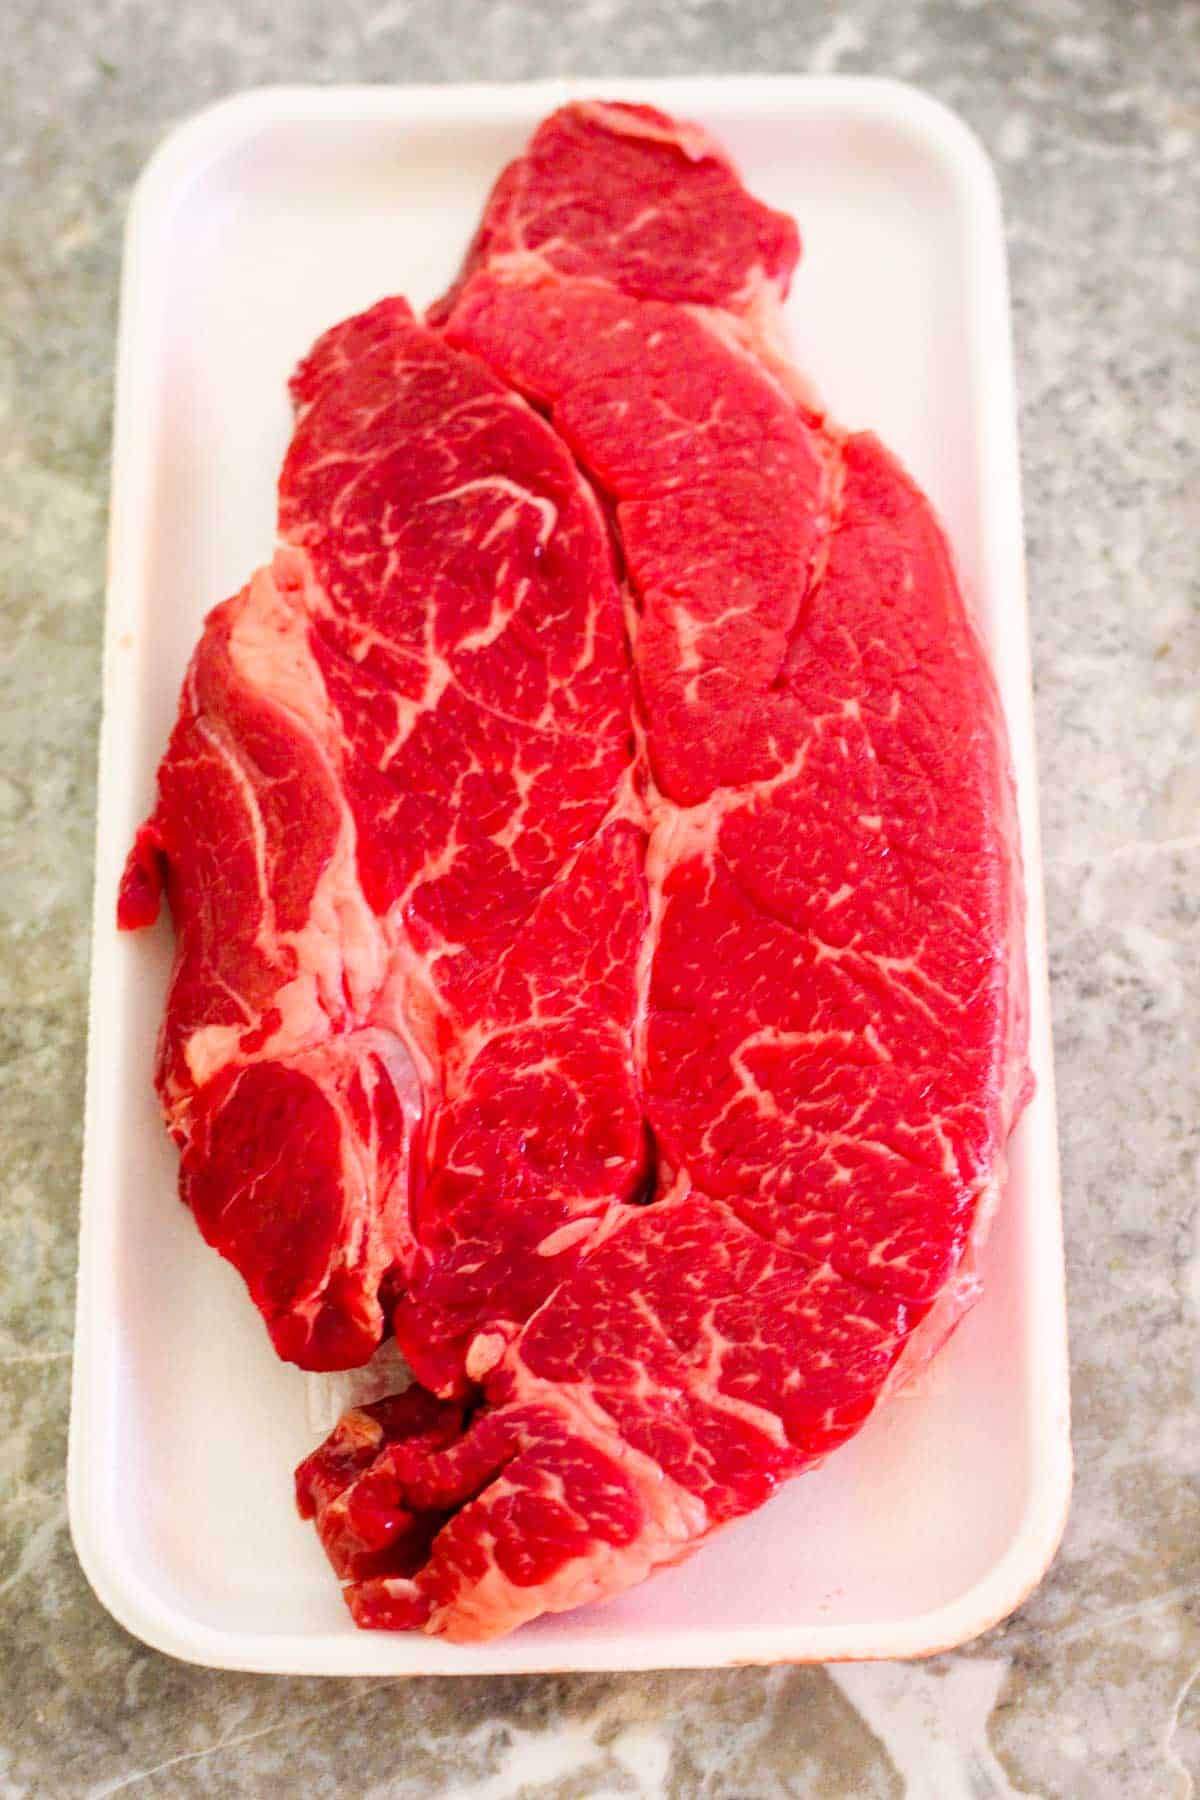 Raw Chuck steak still on store package over a counter.